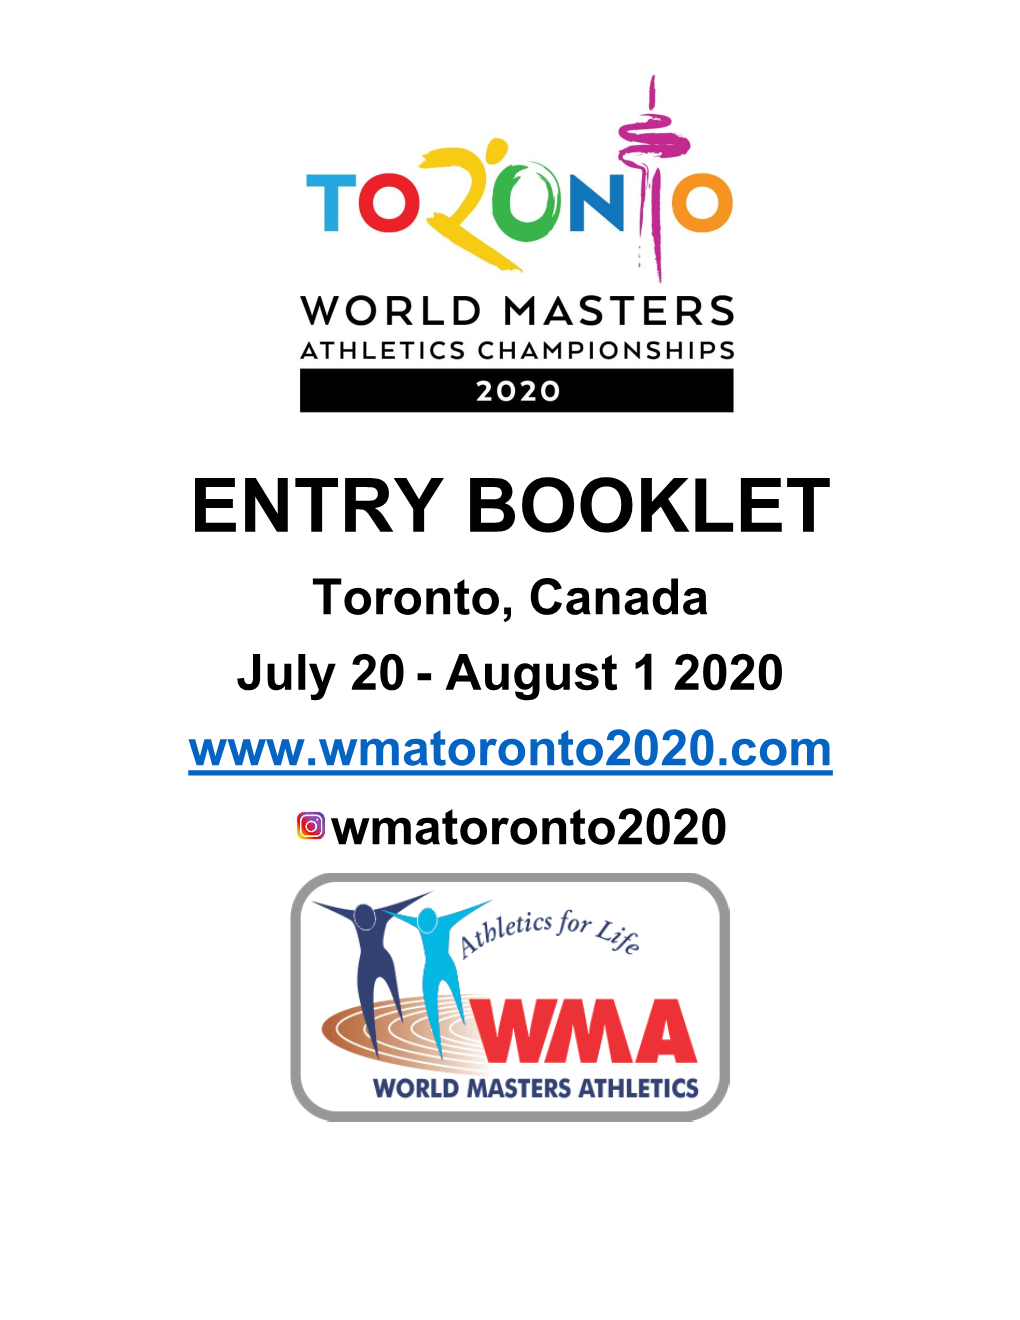 ENTRY BOOKLET Toronto, Canada July 20 - August 1 2020 Wmatoronto2020